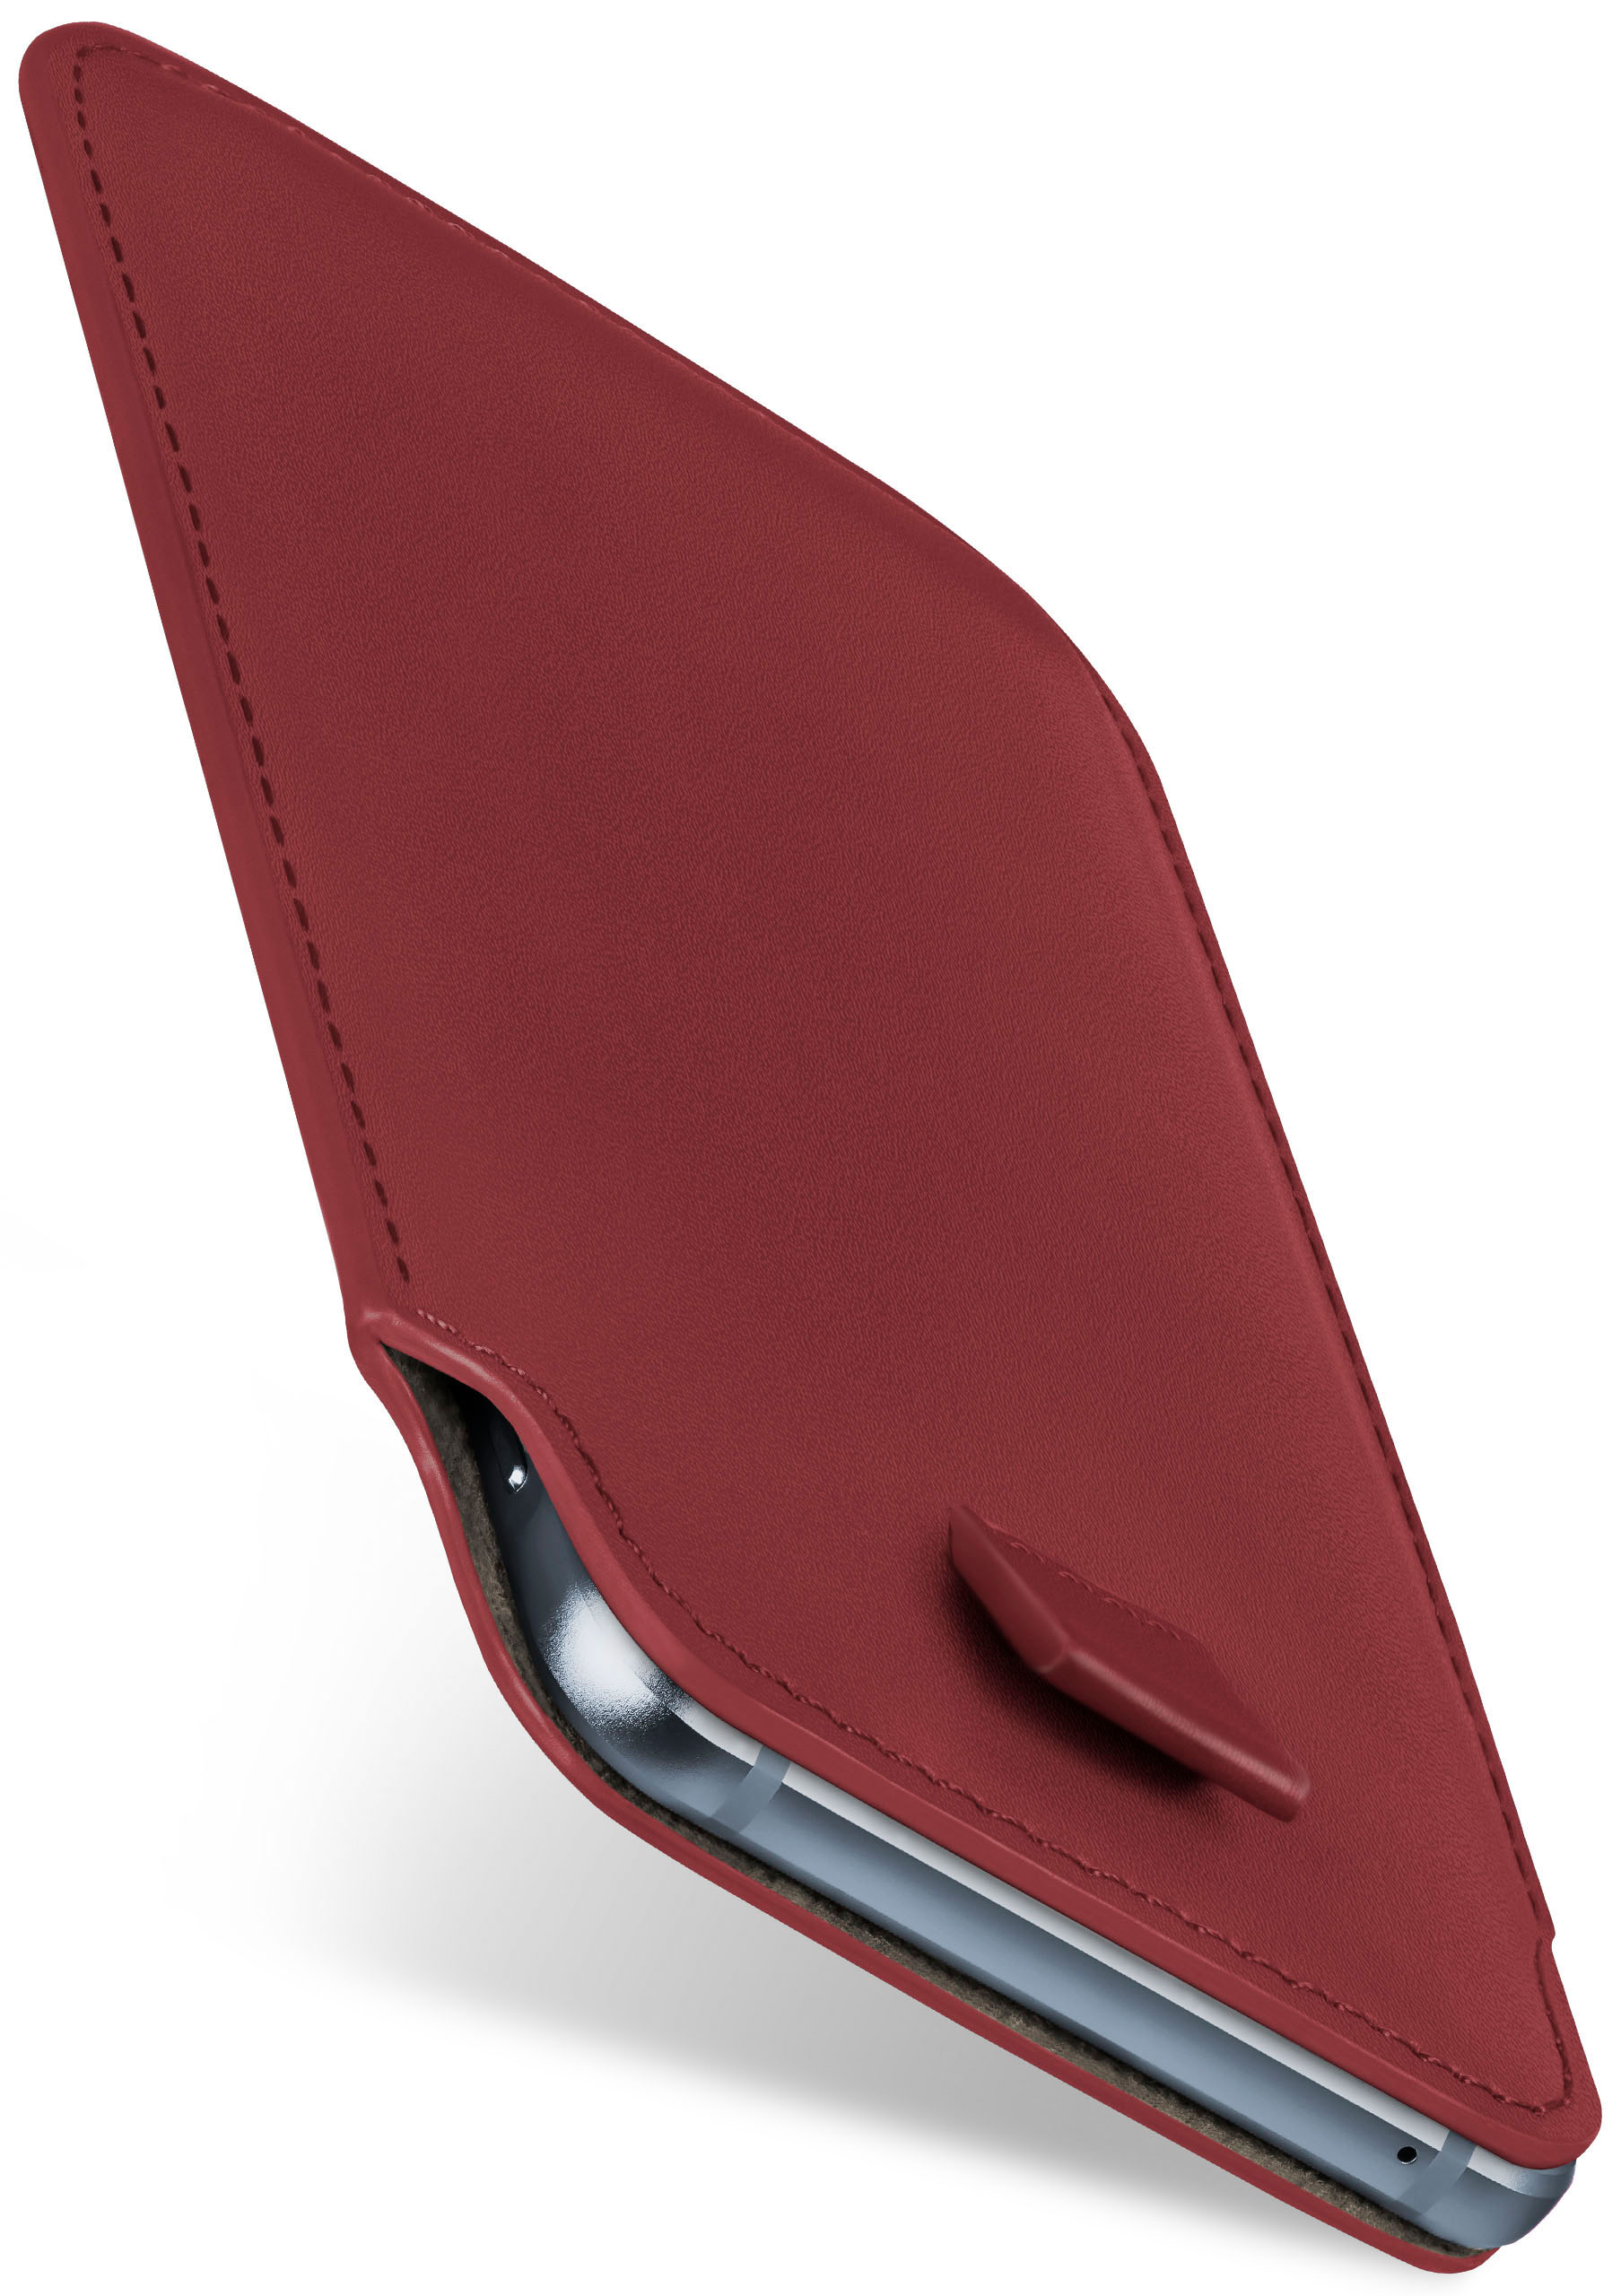 MOEX Slide Case, Full Cover, 5 SE Apple, iPhone Maroon-Red / 5s (2016), 